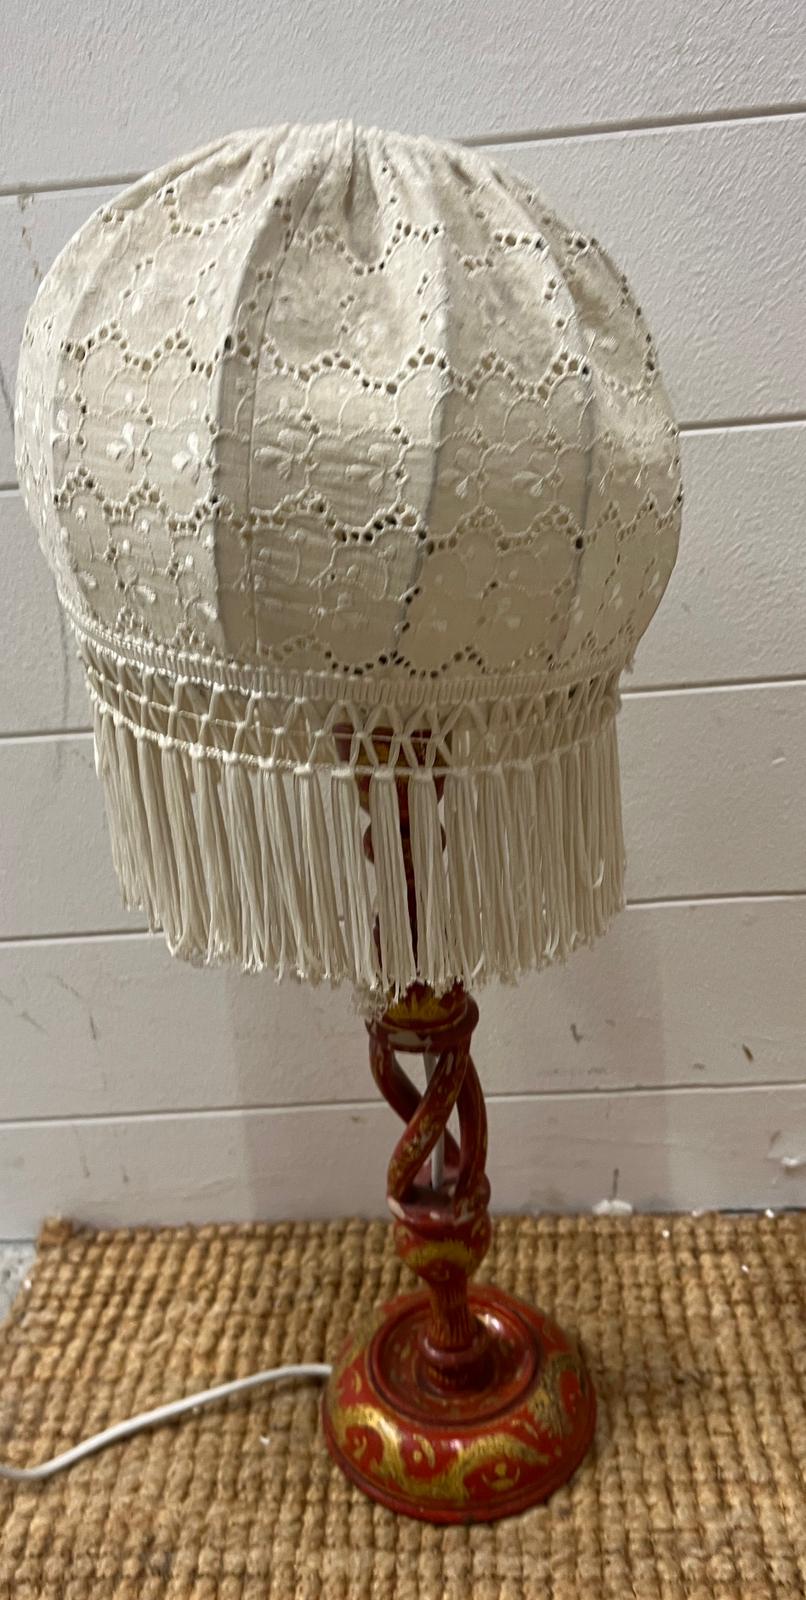 A paper Mache red table lamp